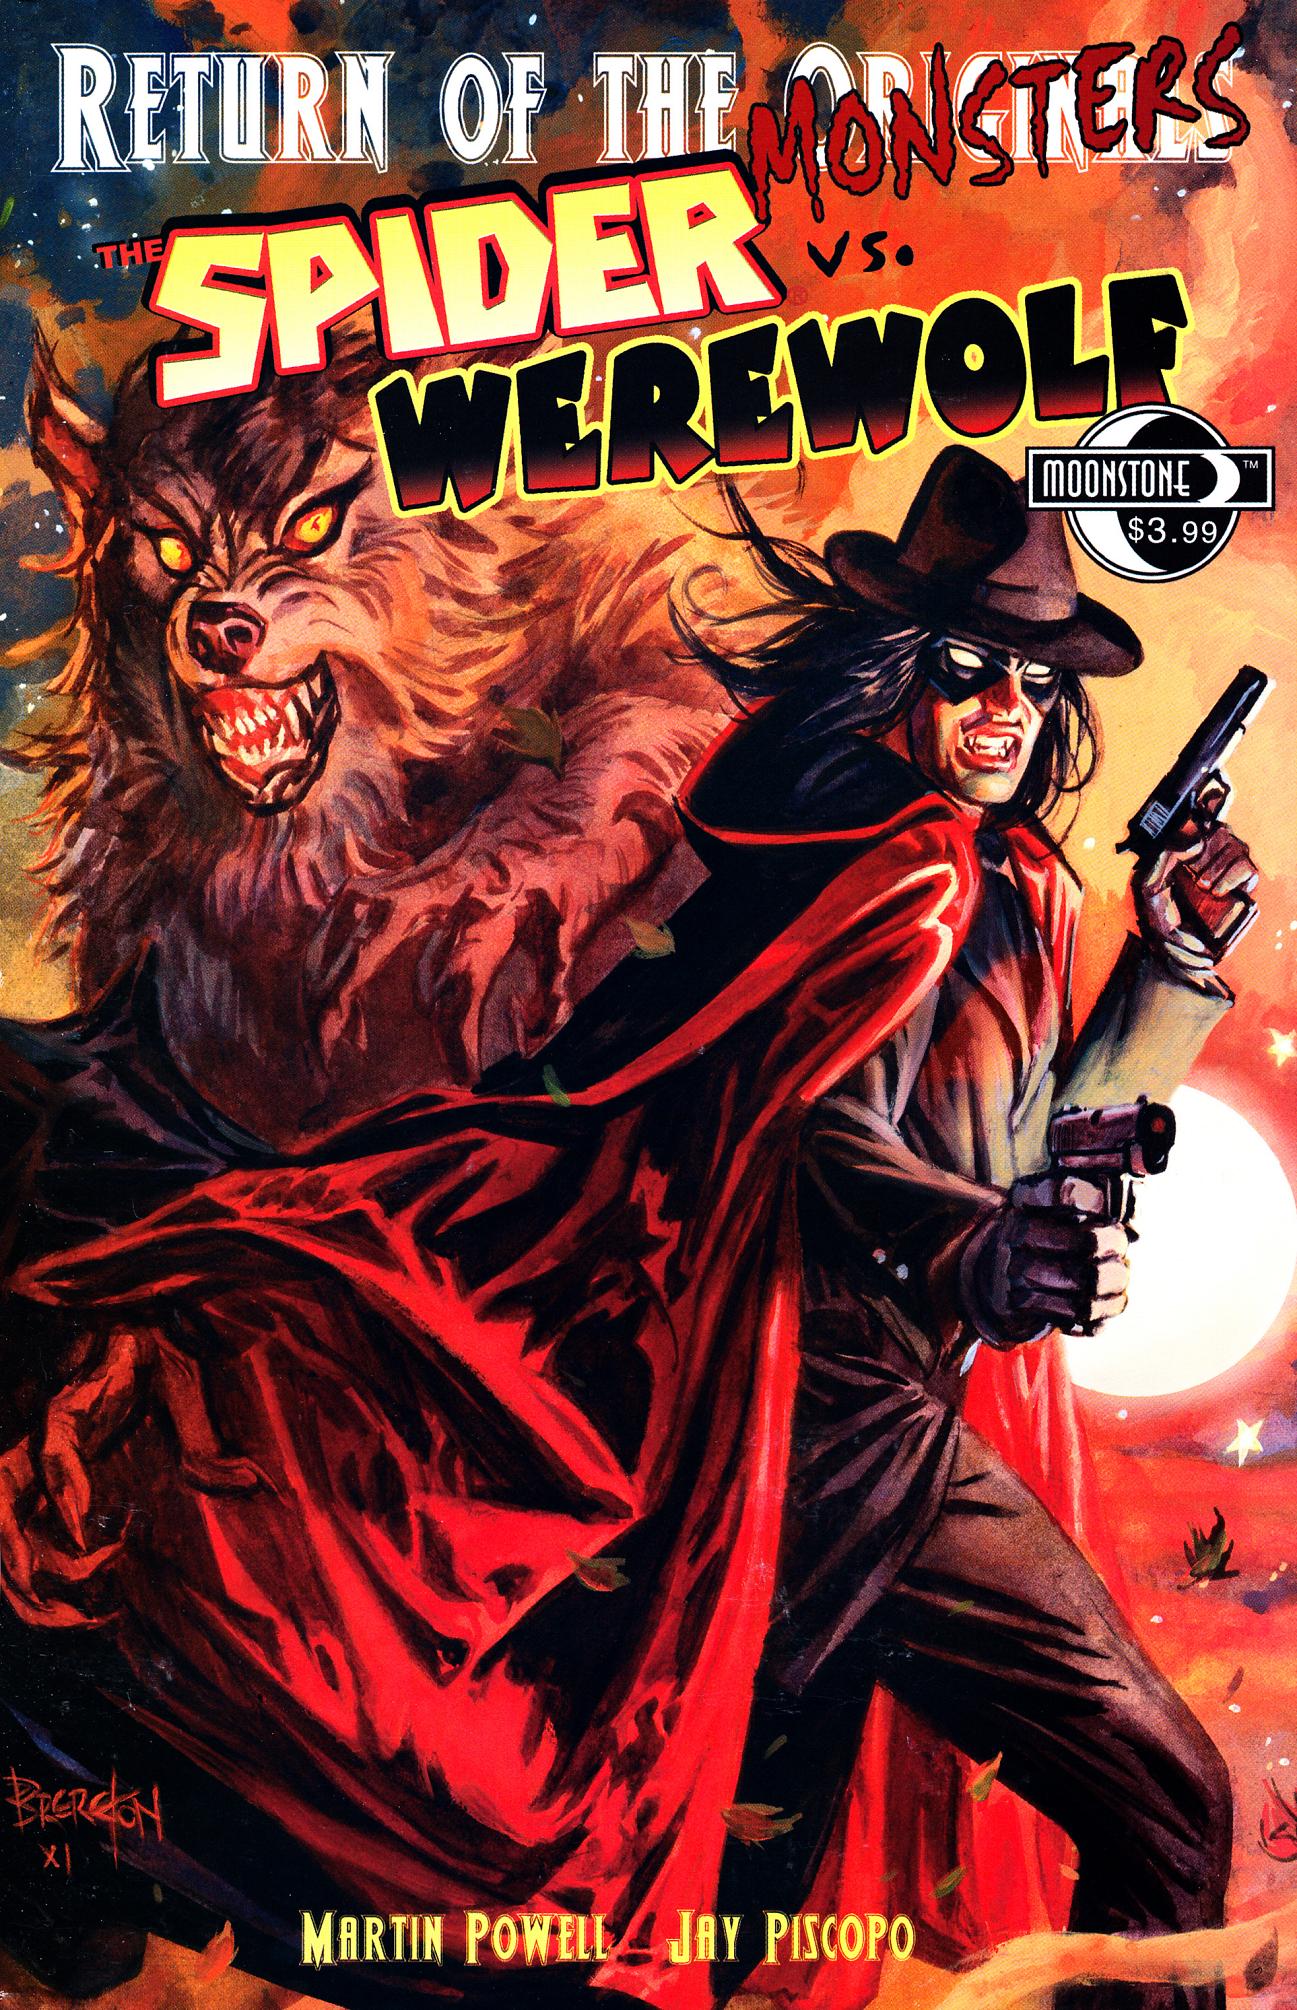 Read online Return of the Monsters: The Spider vs Werewolf comic -  Issue # Full - 1